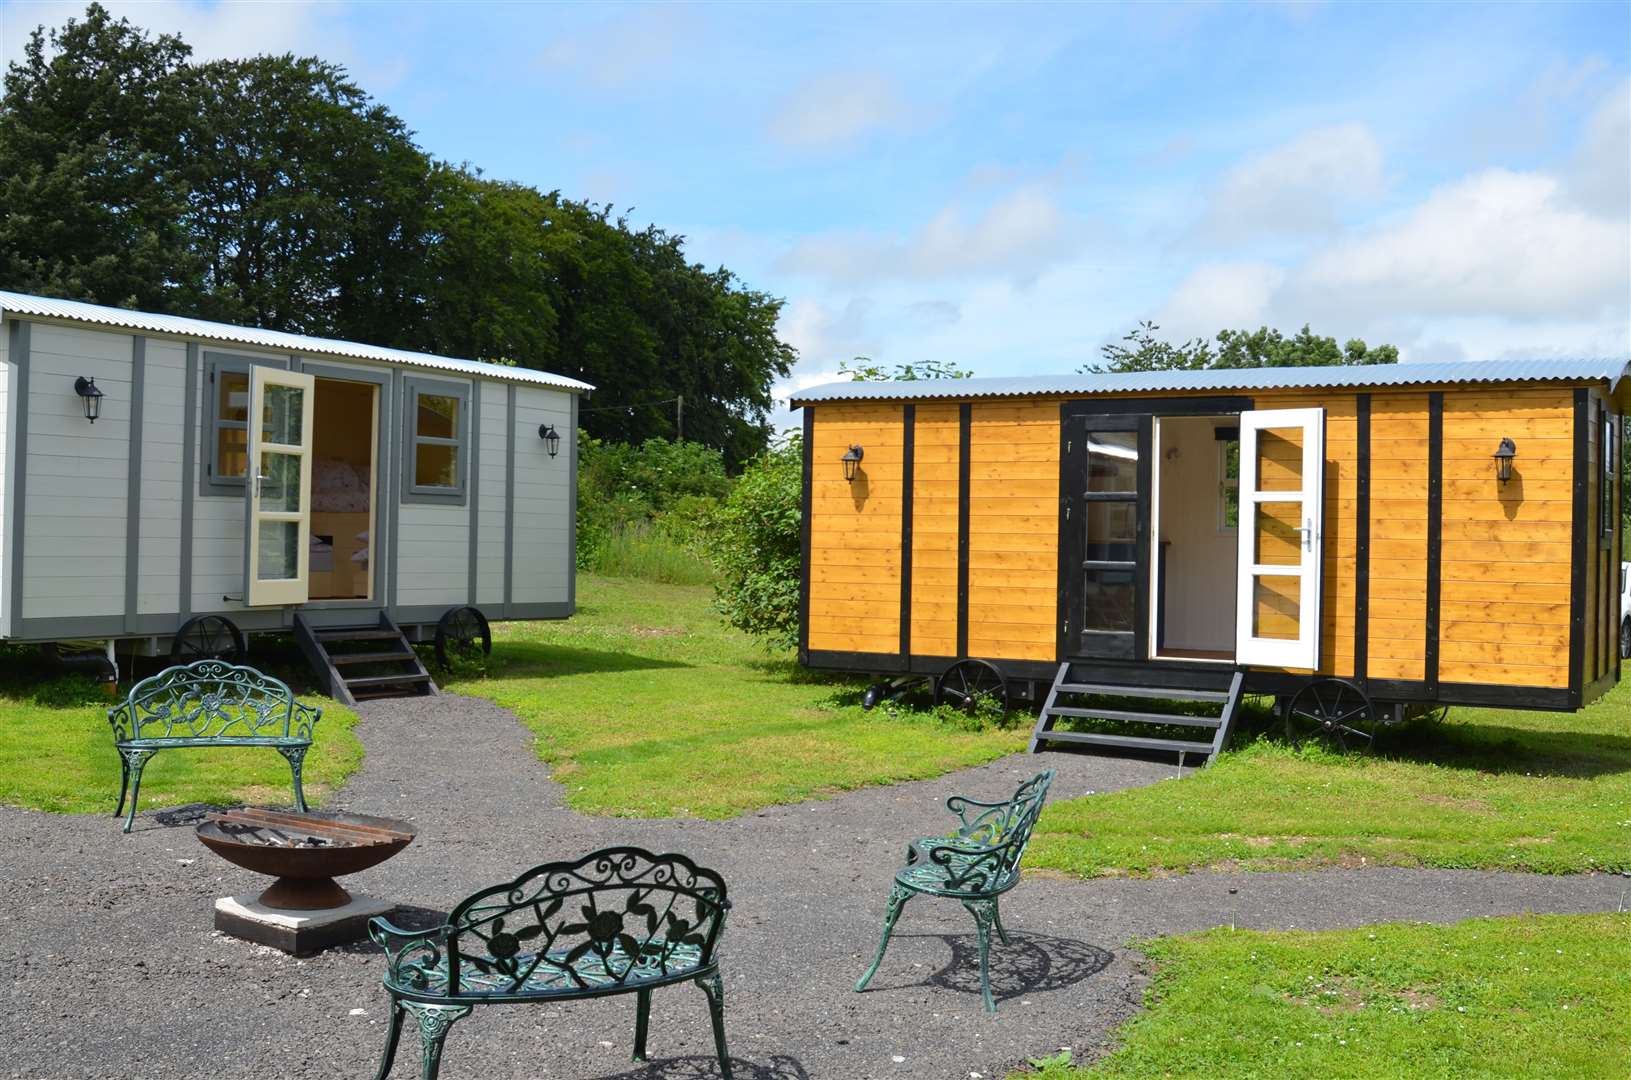 On-site accommodation is now available in the form of five shepherds' huts